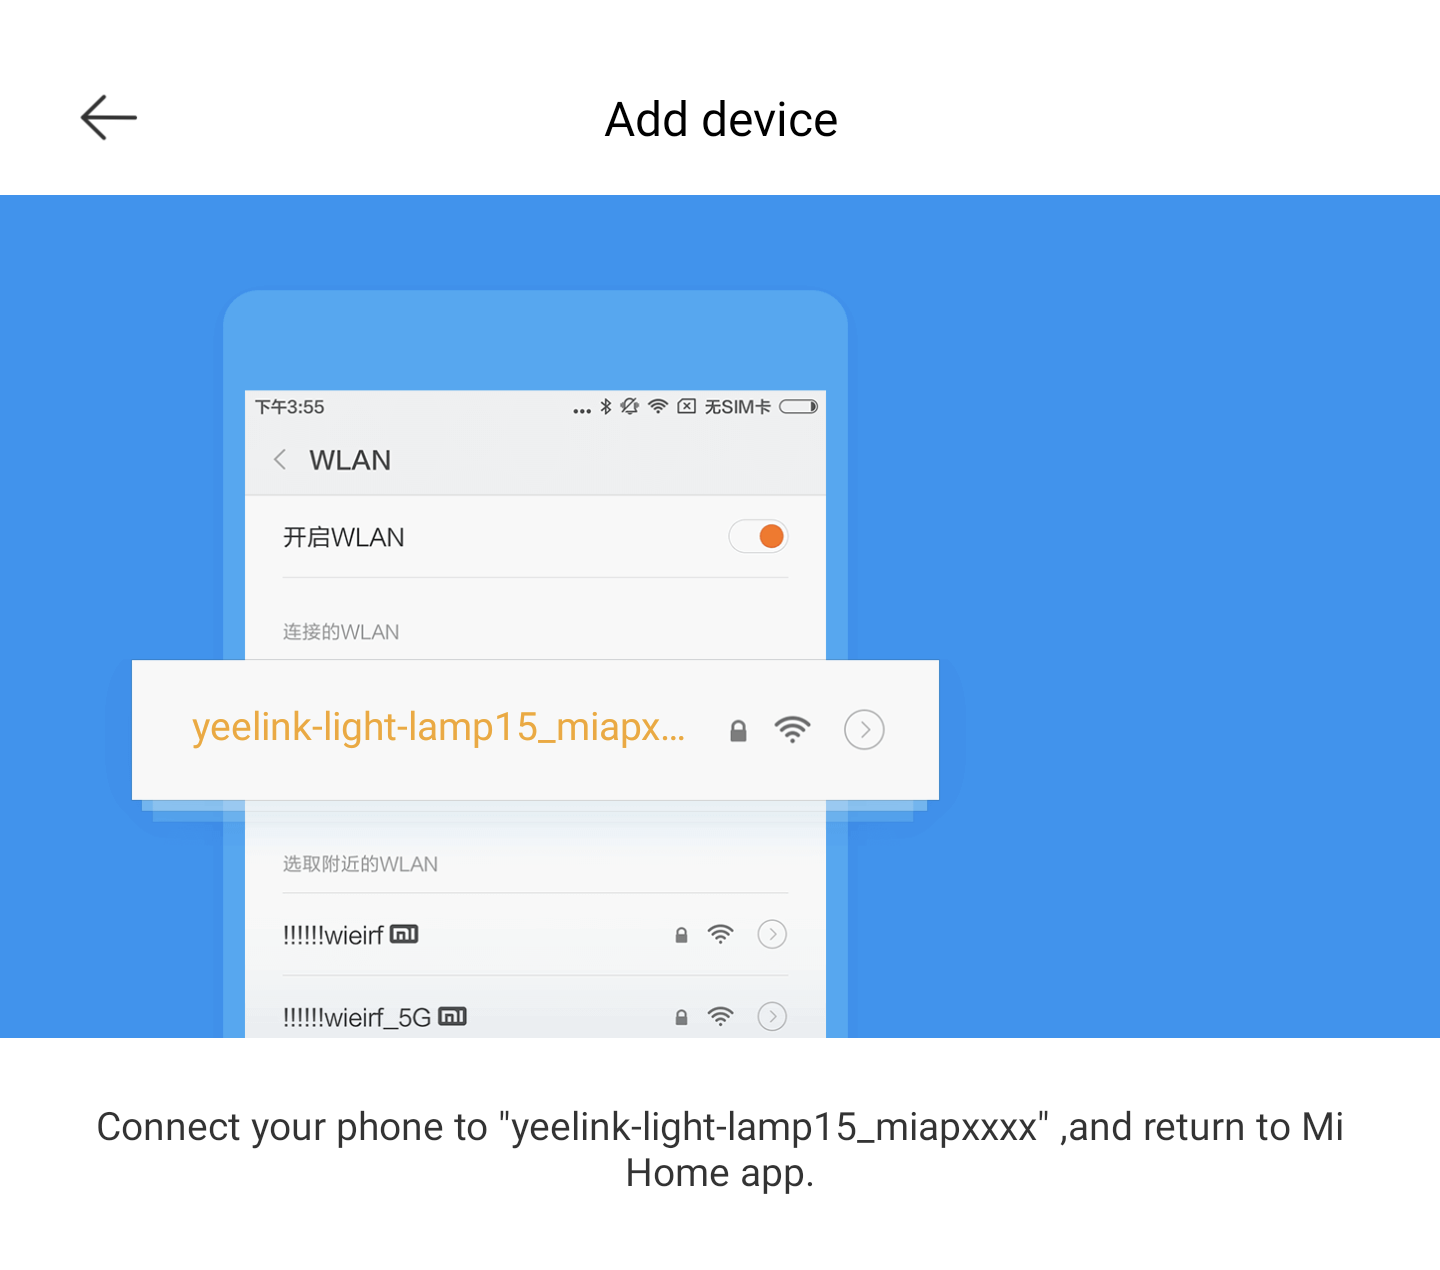 Screenshot from the Xiaomi app showing that the phone needed to connect to the lamp over WiFi.